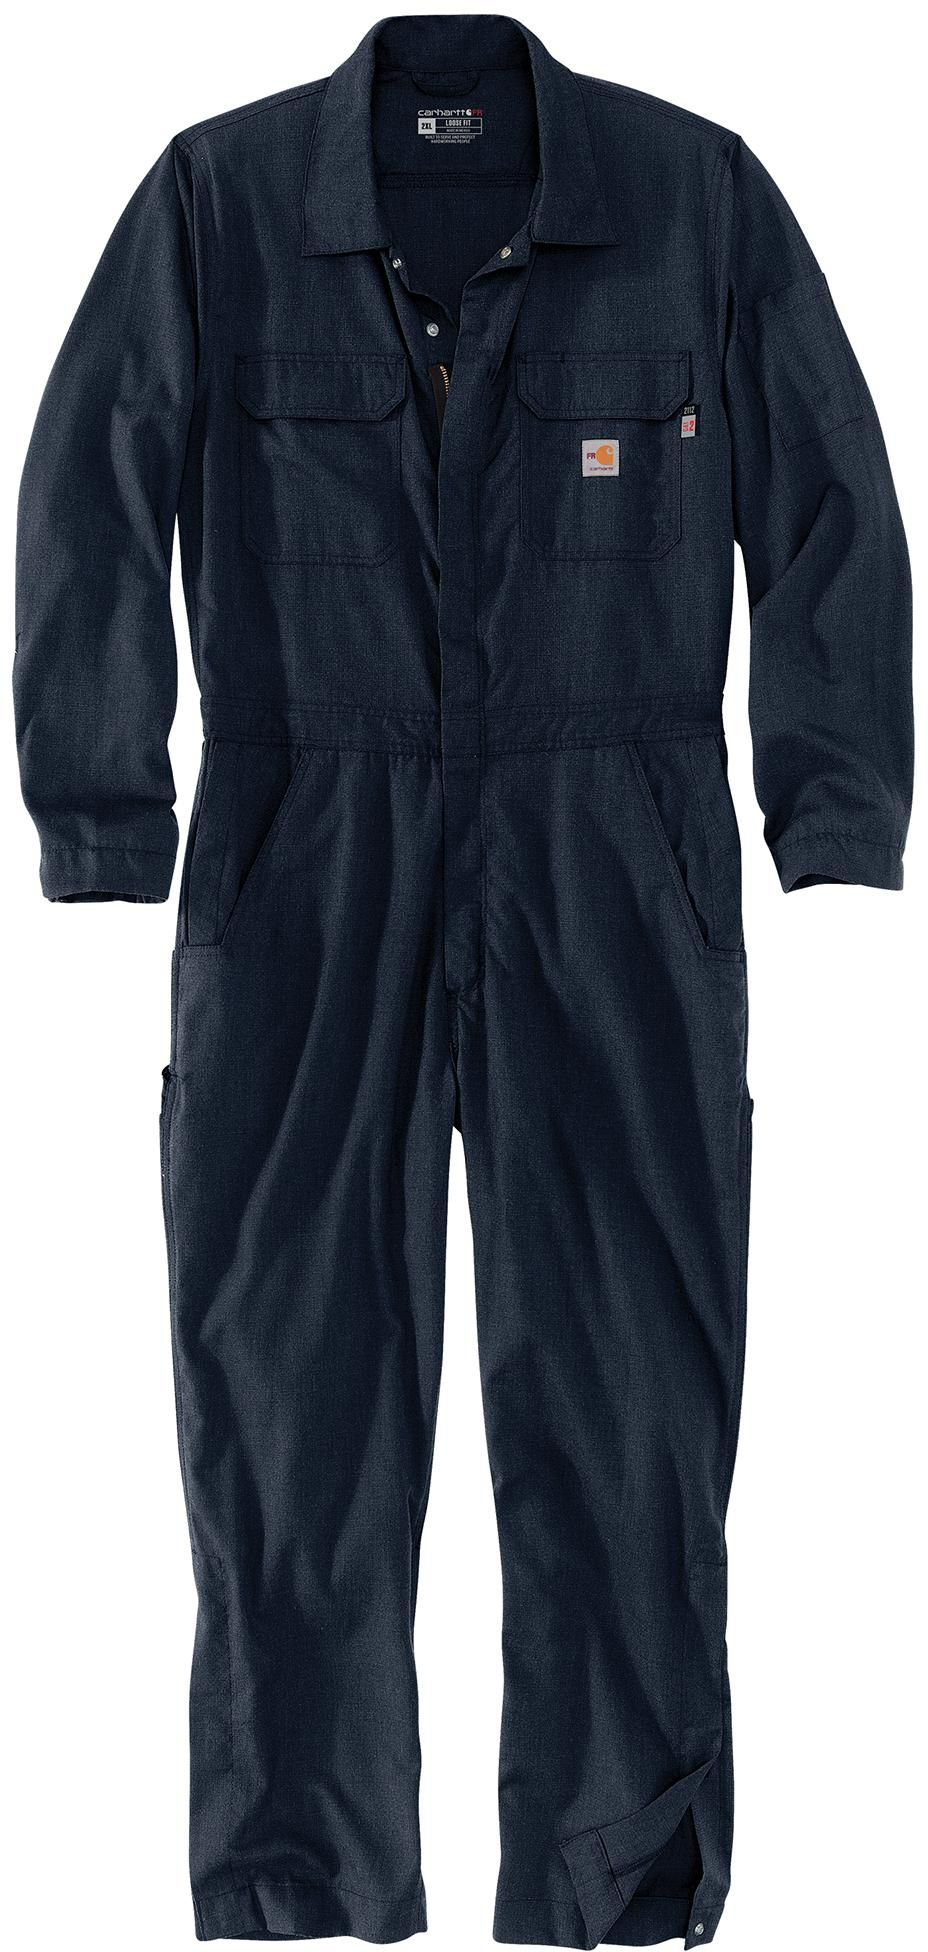 Carhartt Force Flame-Resistant Lightweight Loose-Fit Coveralls for Men